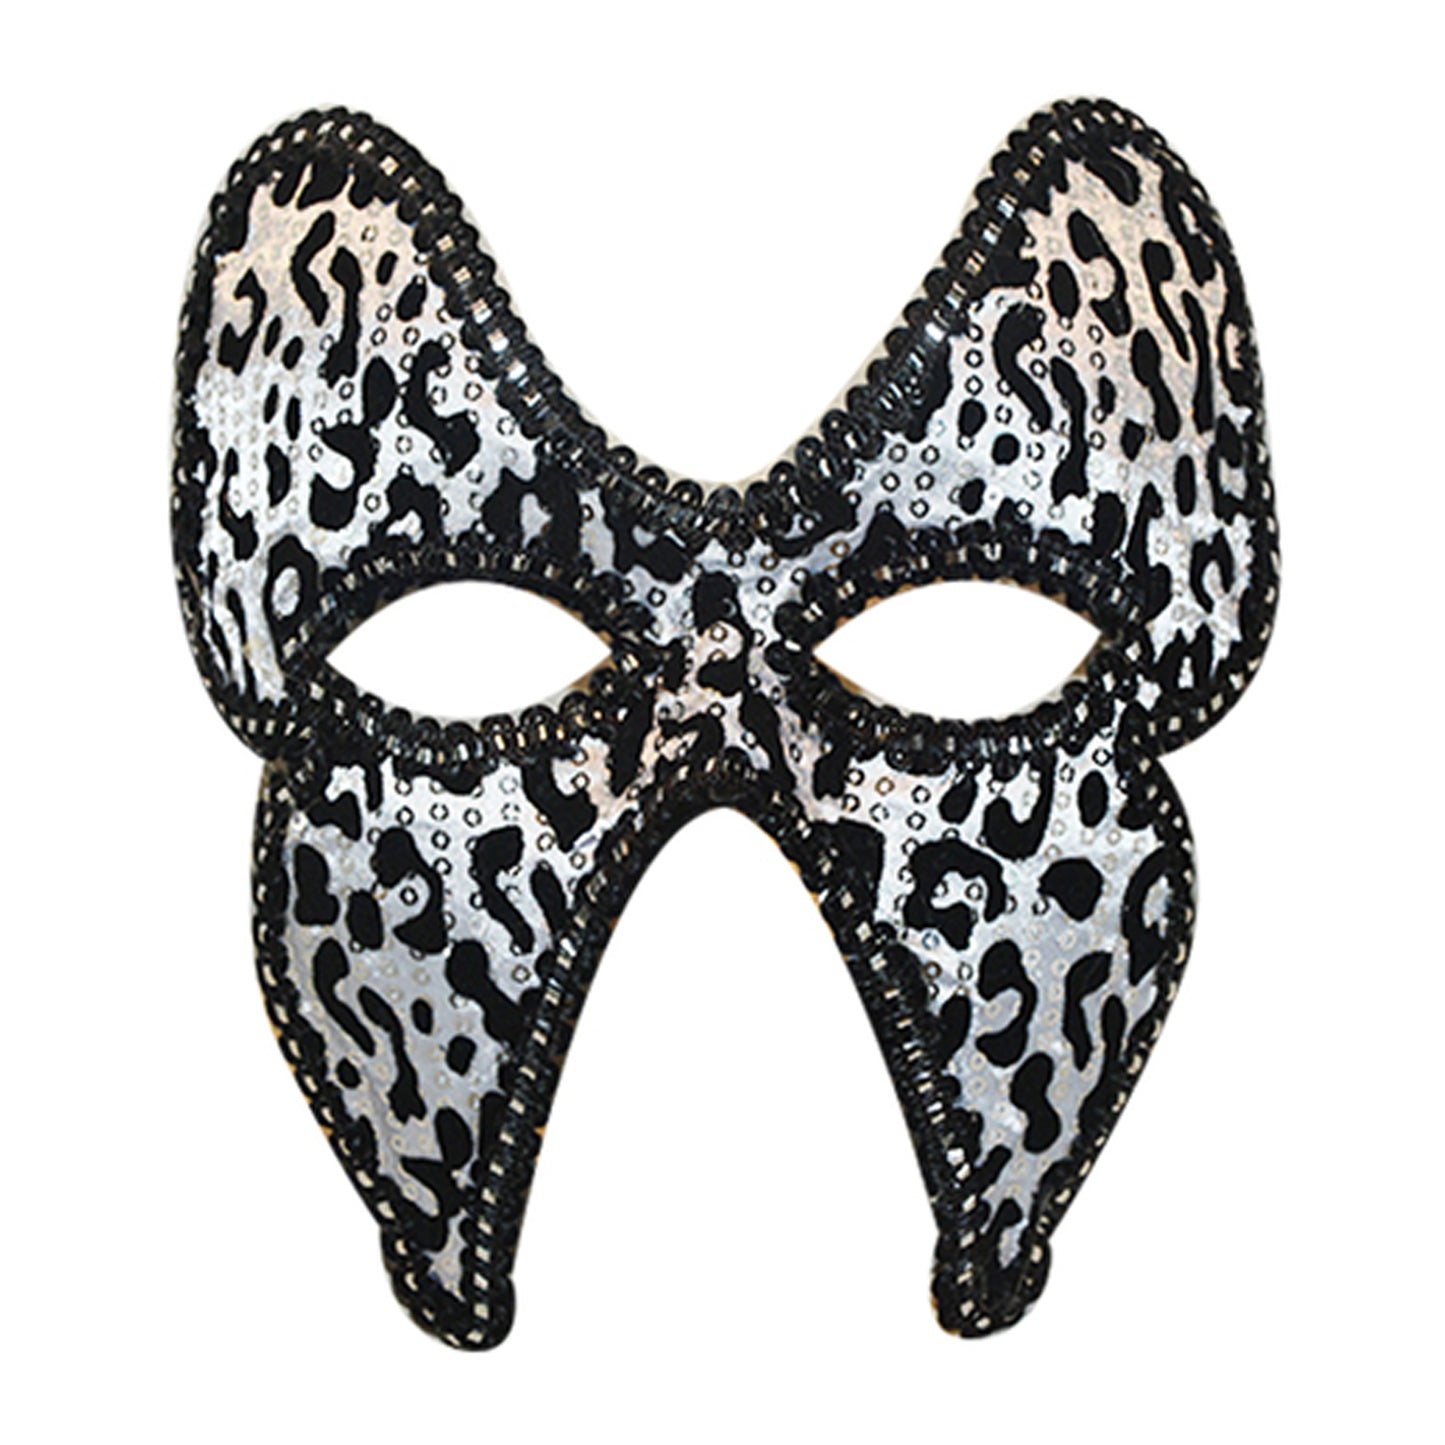 Butterfly Shaped Masquerade Mask